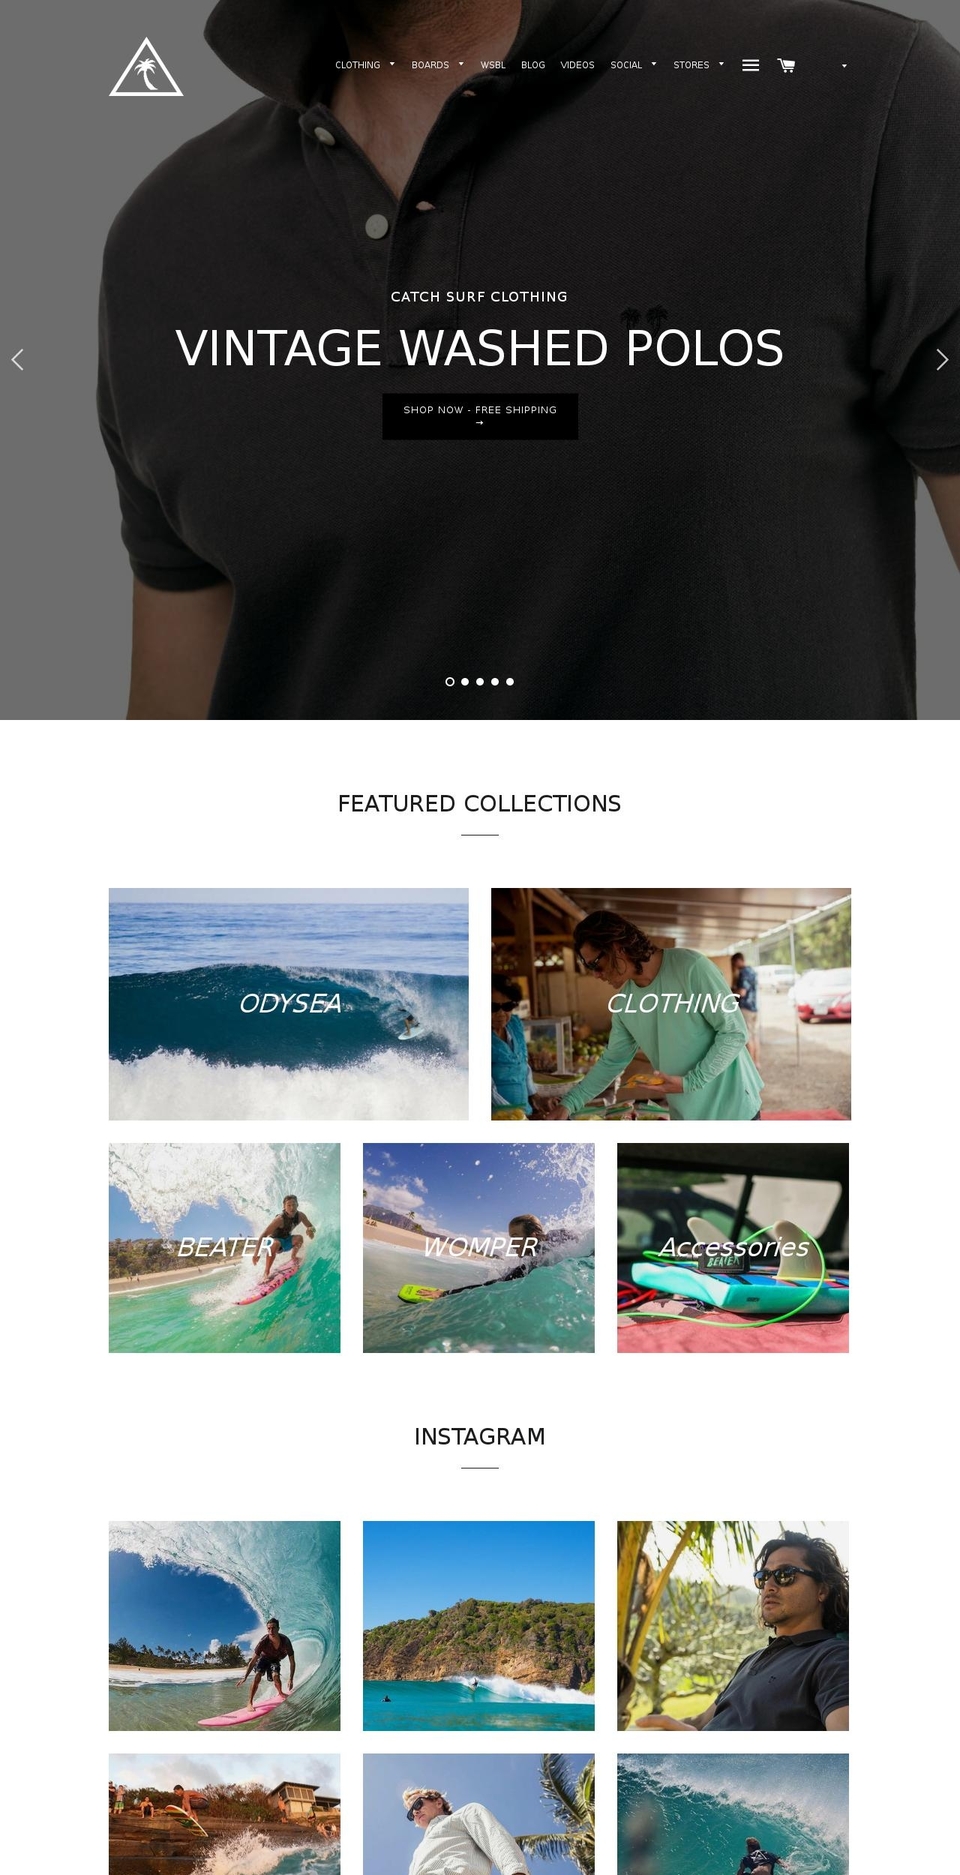 Brooklyn Shopify theme site example catchsurf.com